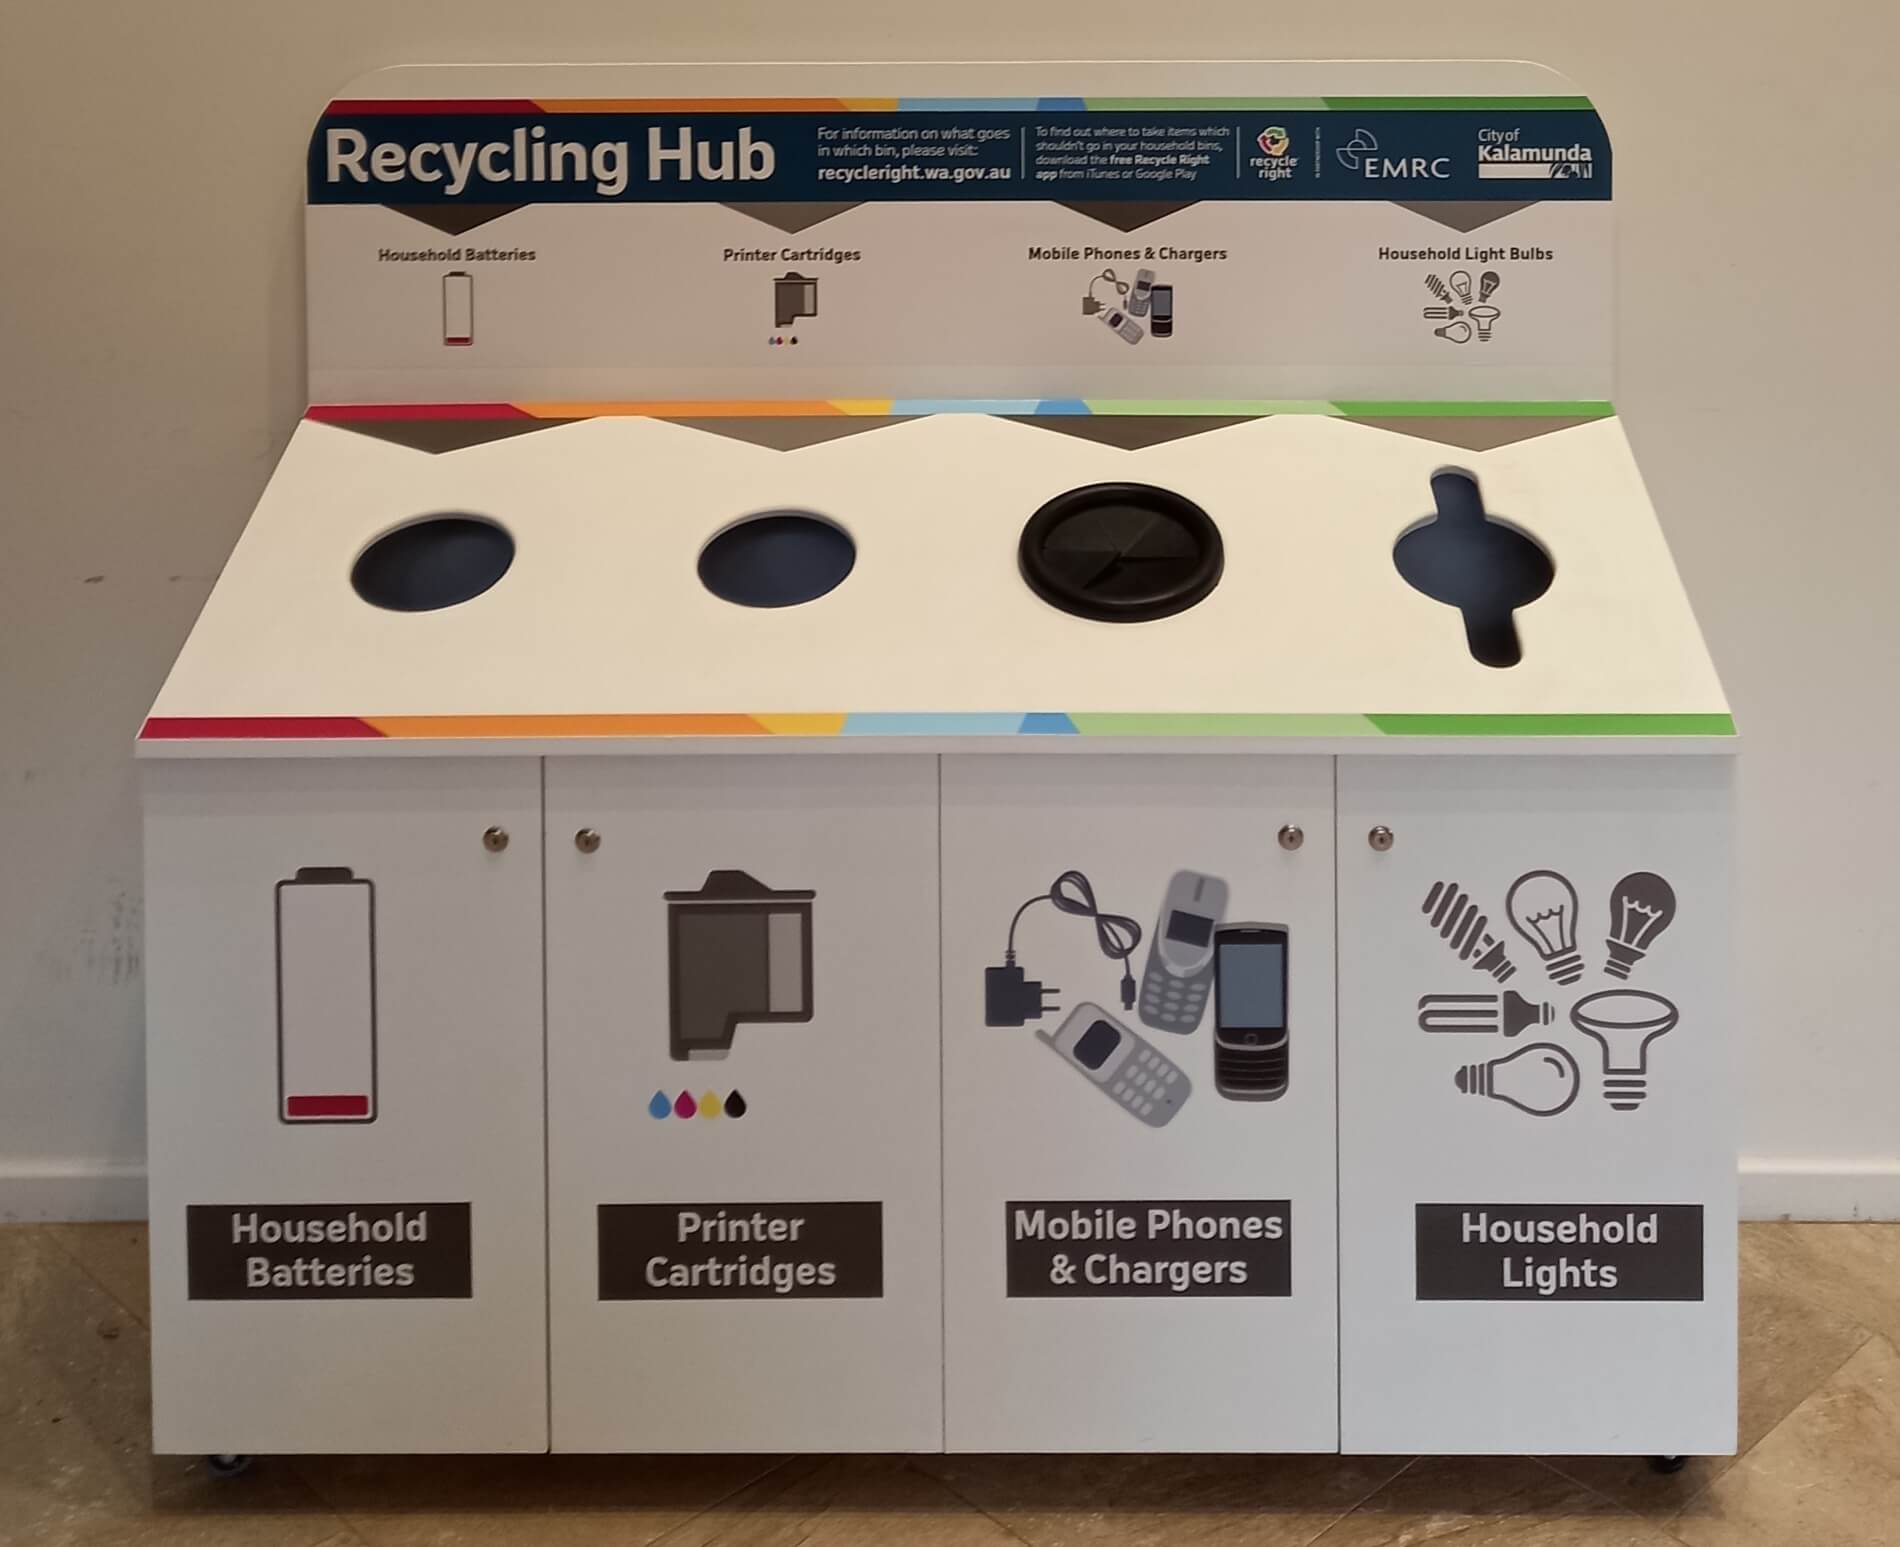 A recycling hub located at various locations in the City of Kalamunda